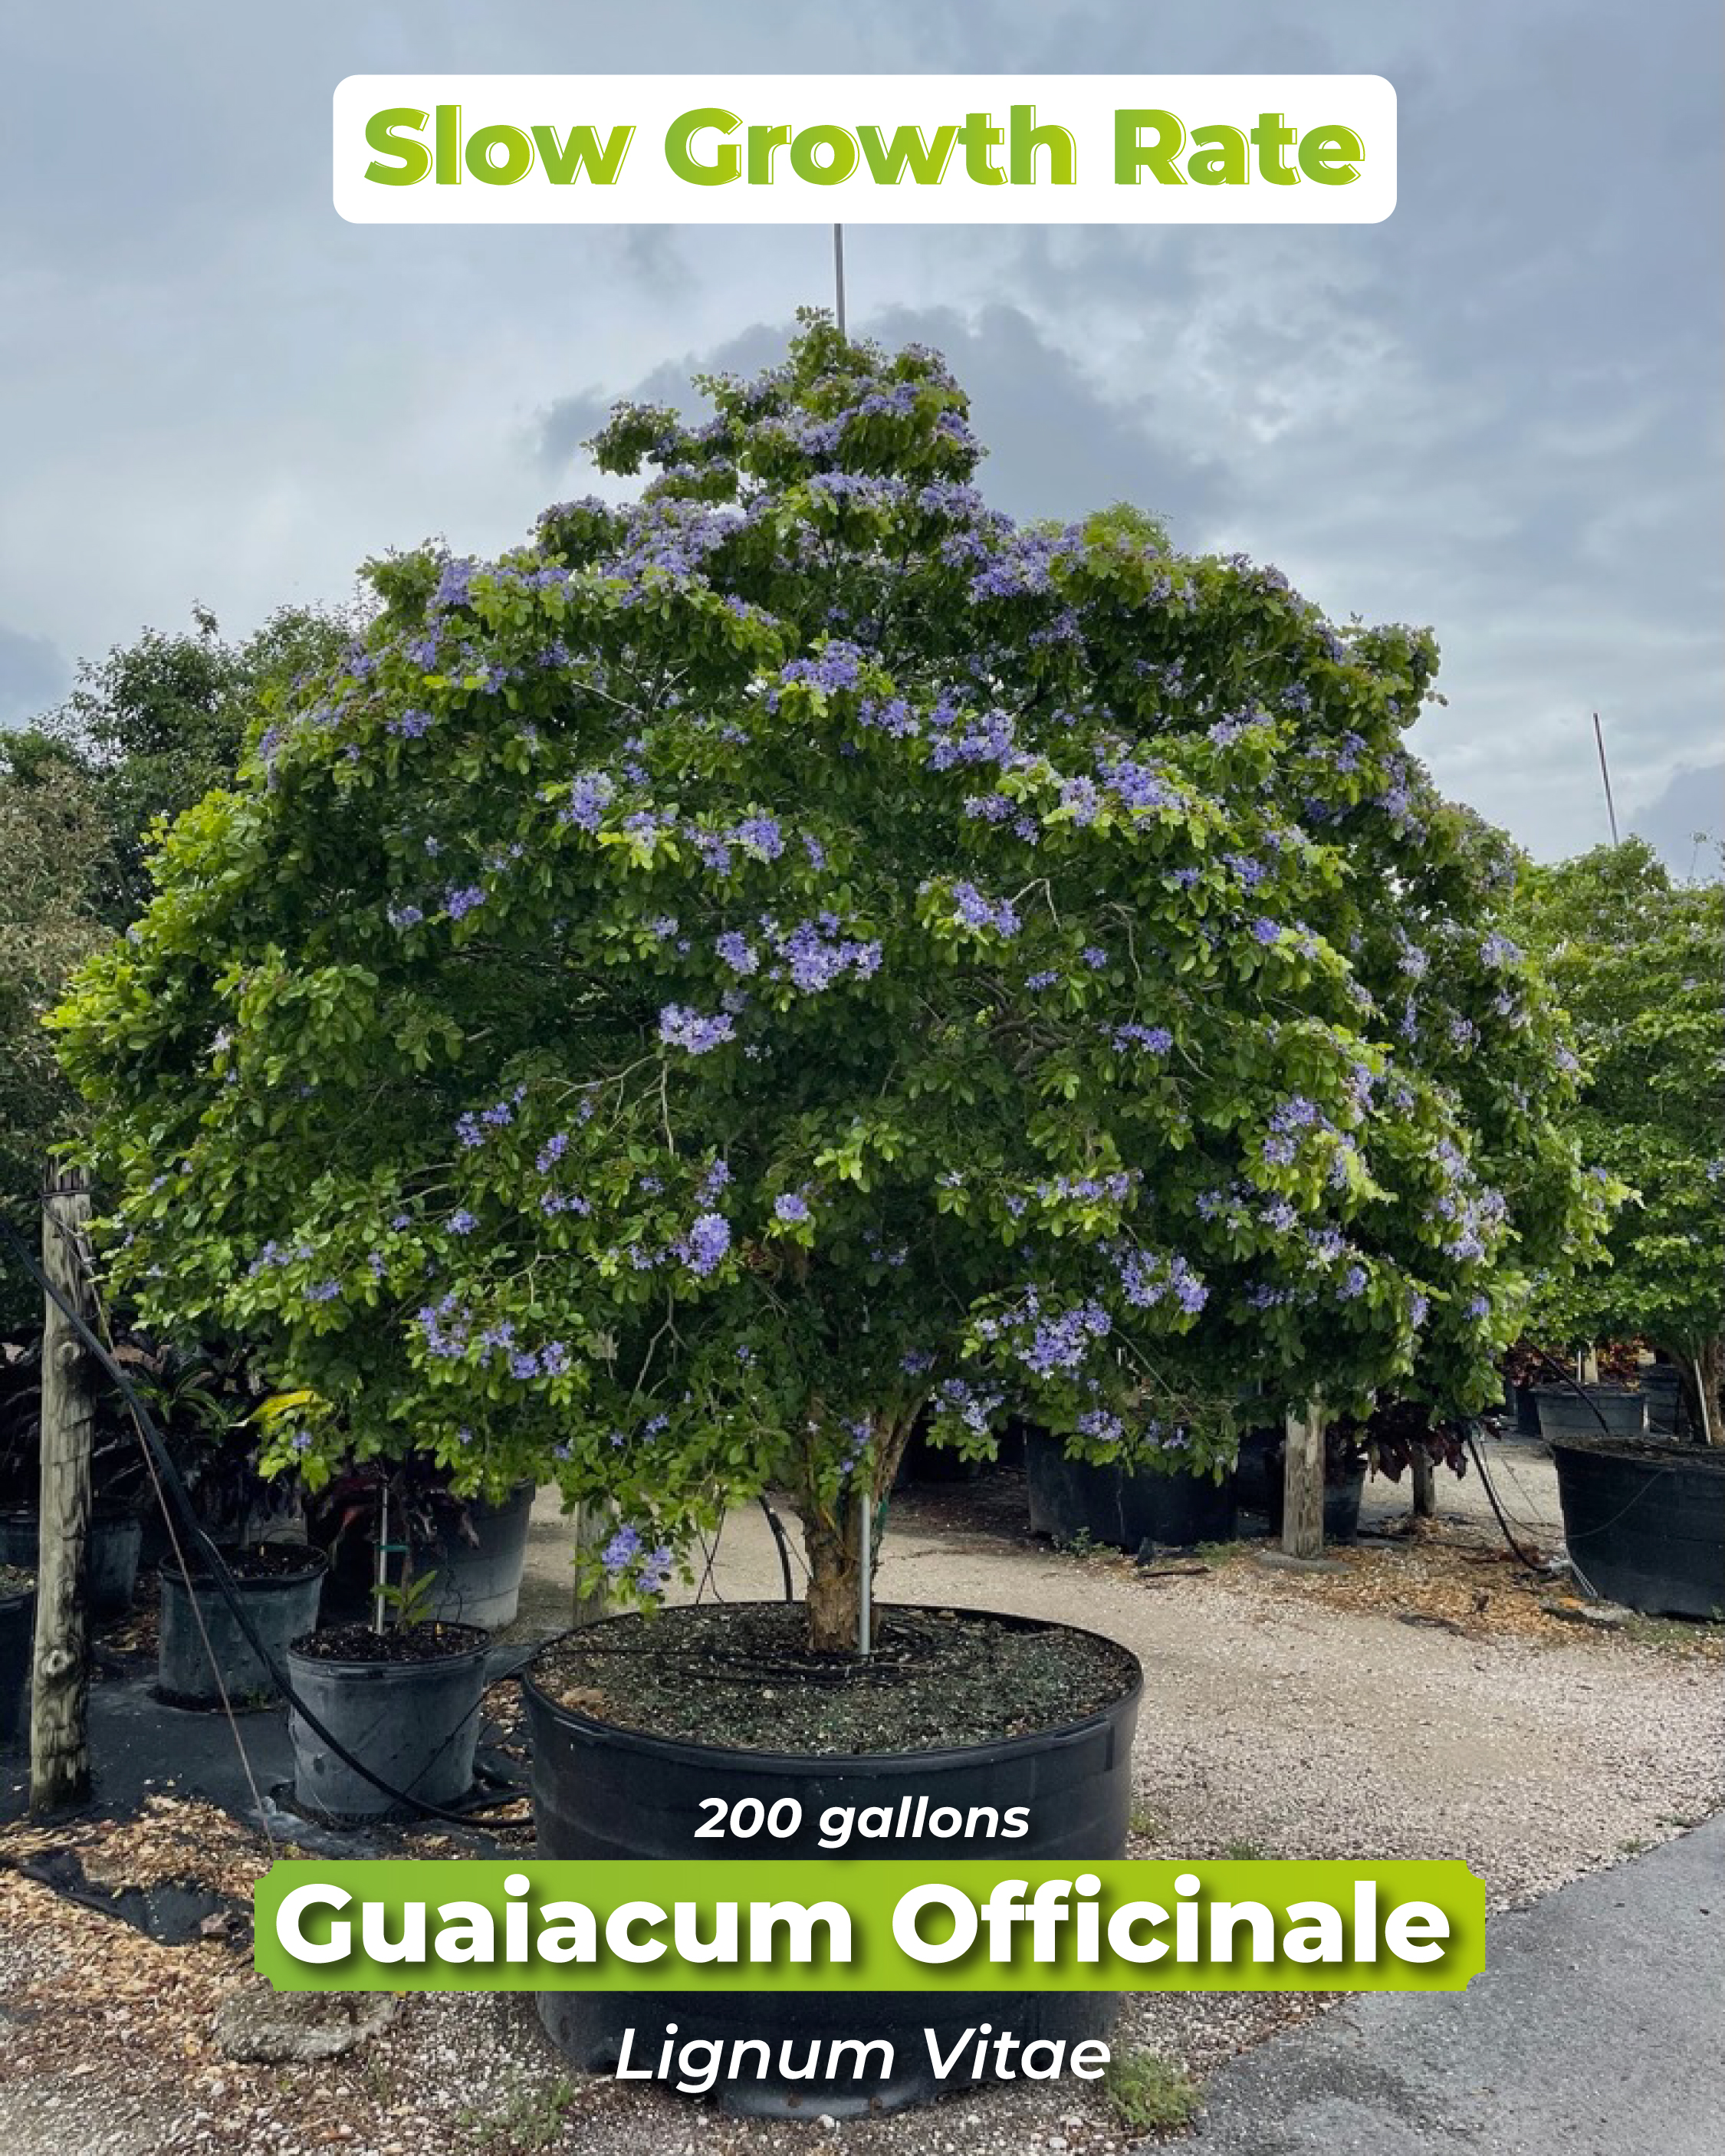 slow-growth-rate-guiacum-officinale-lignum-vitae-tree-of-life-200-gallons